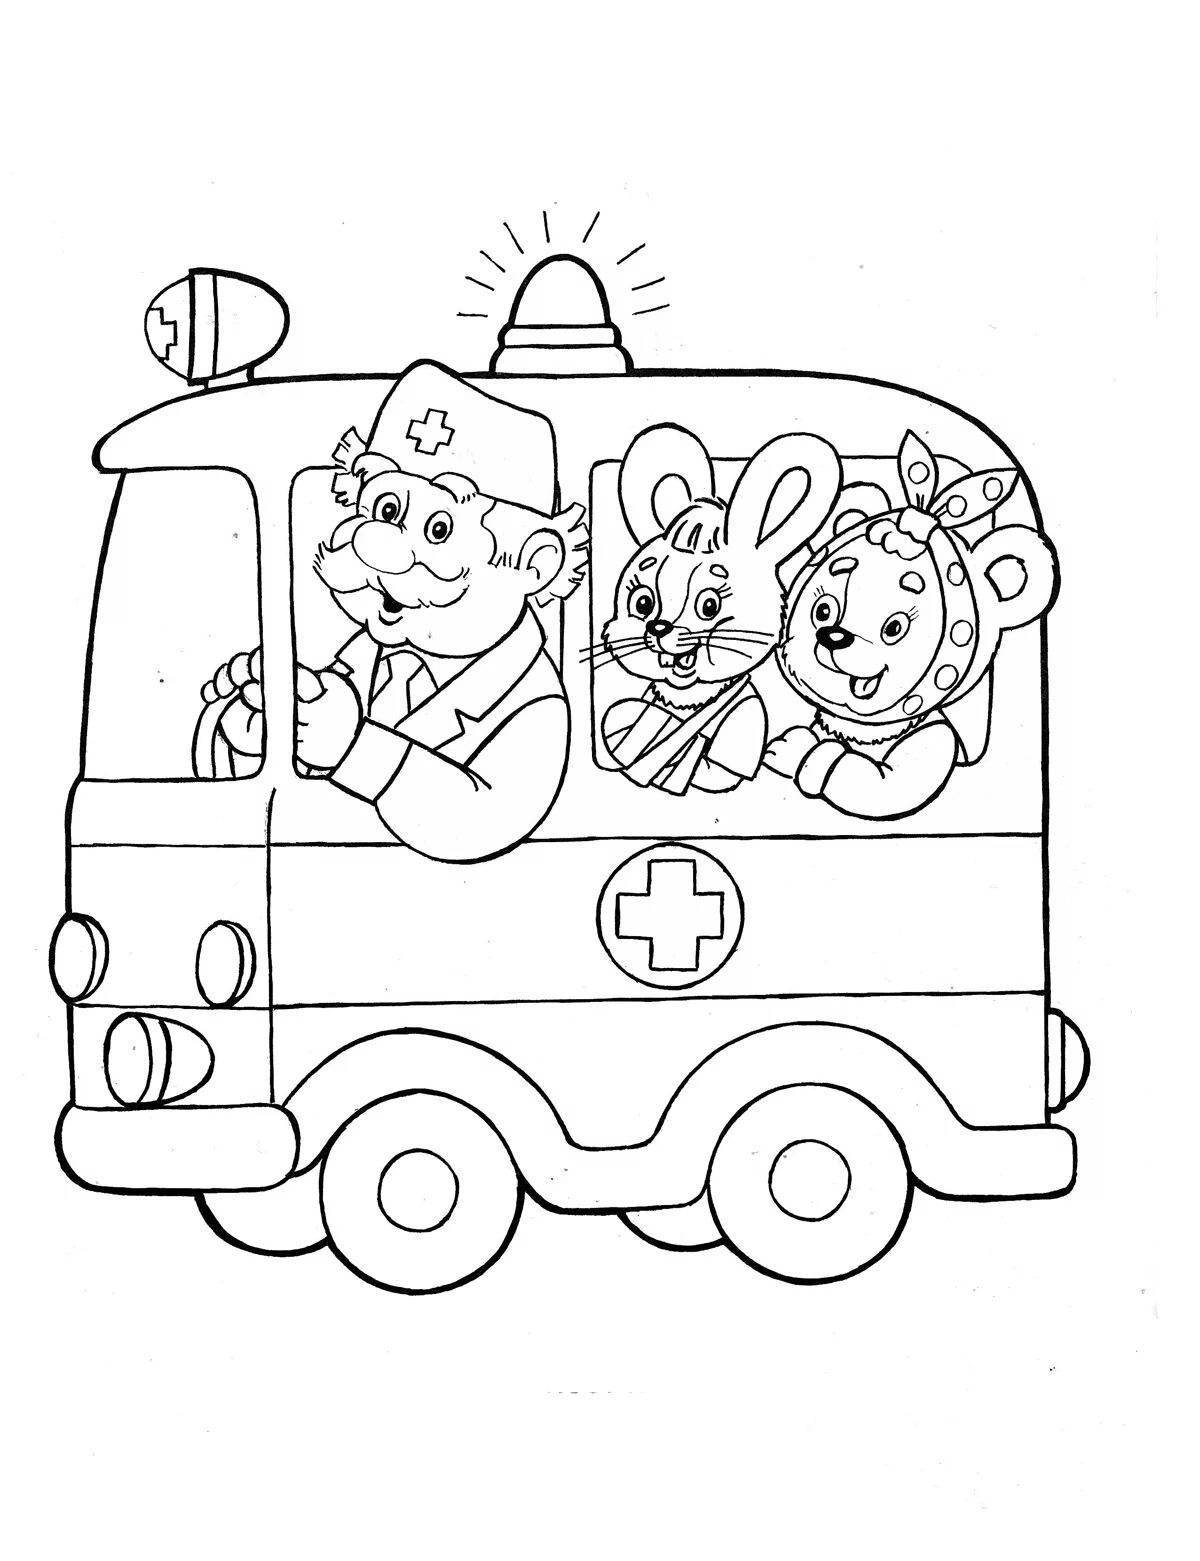 Great ambulance coloring page for 3-4 year olds